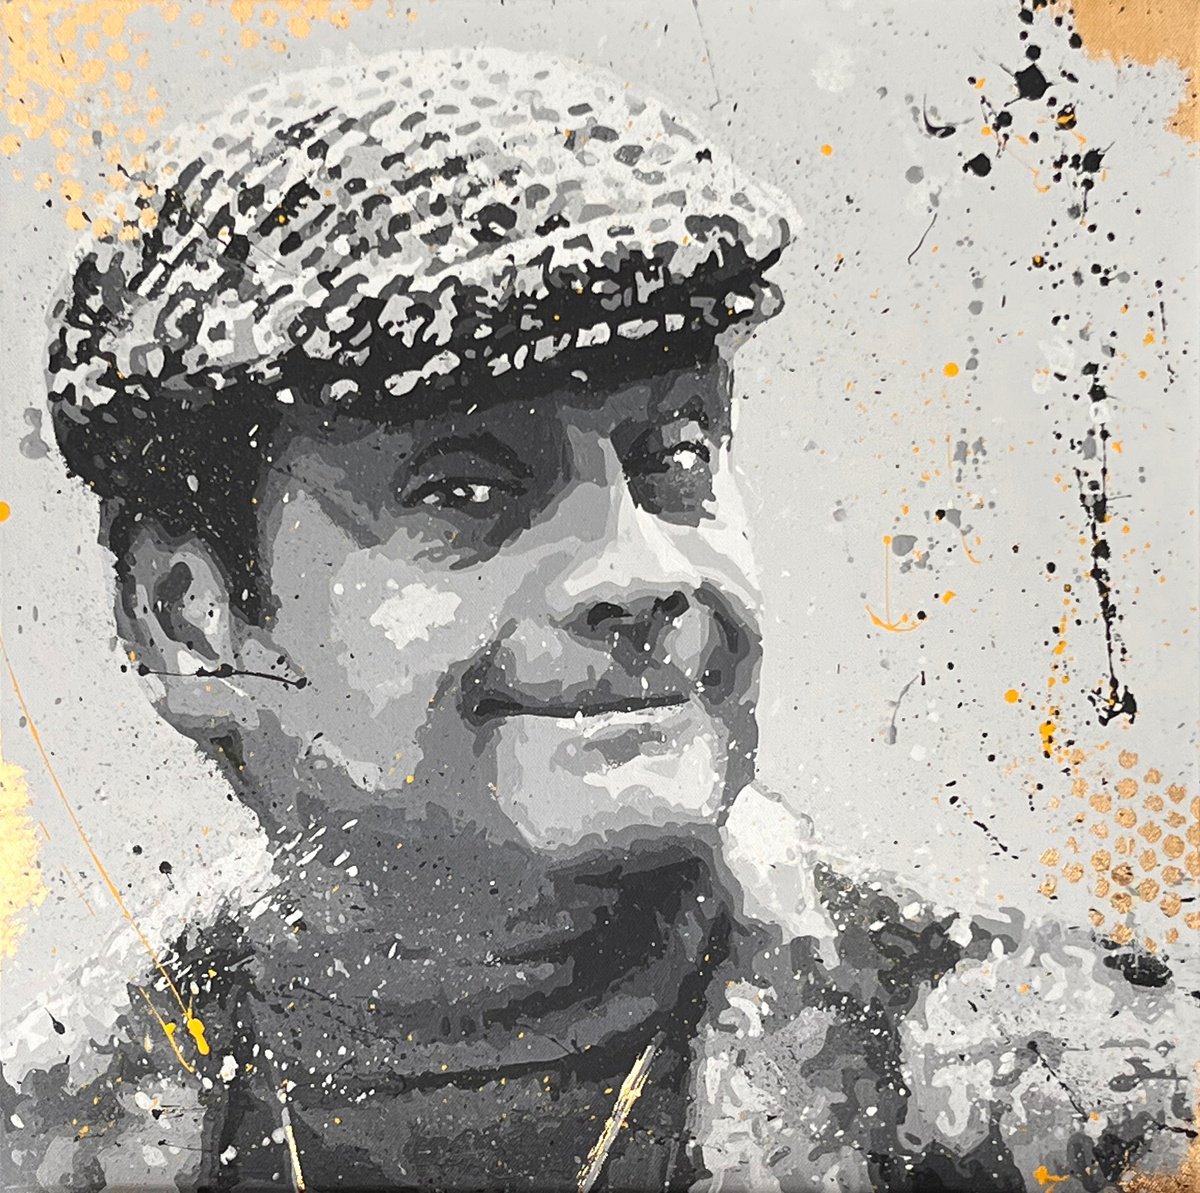 Del Boy by Martin Rowsell